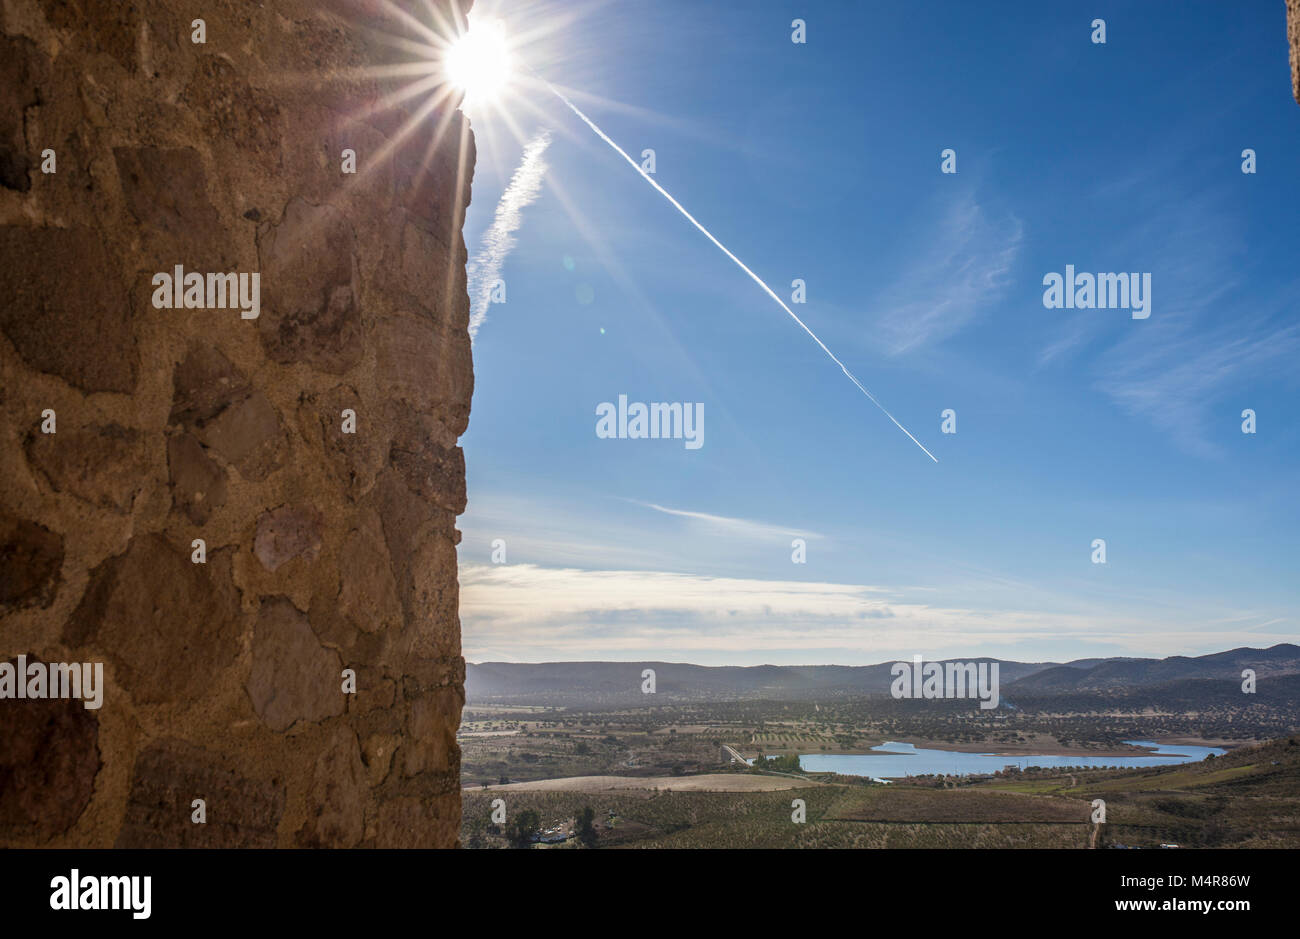 View from Castle of Belmez tower with jet contrail and sunshine, Cordoba, Spain. Situated on the high rocky hill overlooking town of Belmez Stock Photo